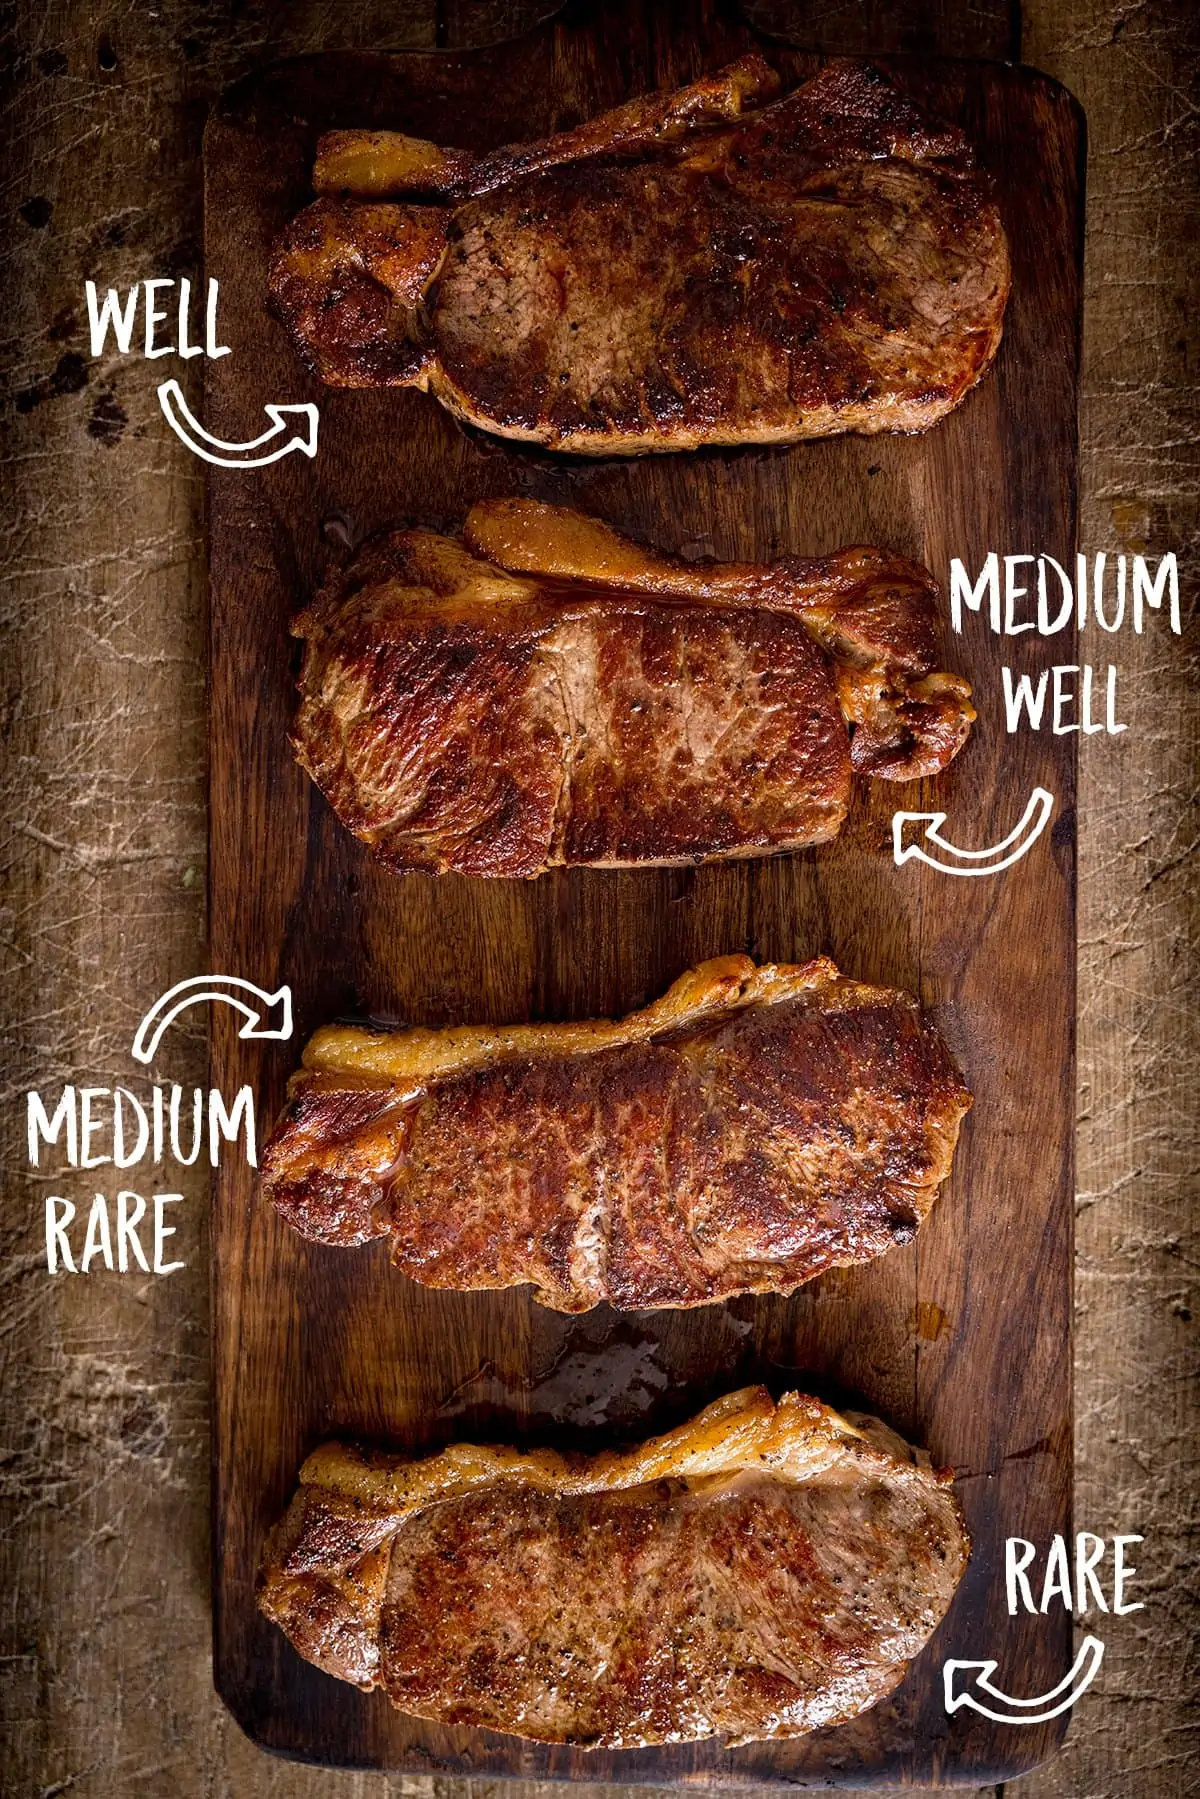 https://www.kitchensanctuary.com/wp-content/uploads/2021/09/How-to-cook-the-perfect-steak-tall2.webp